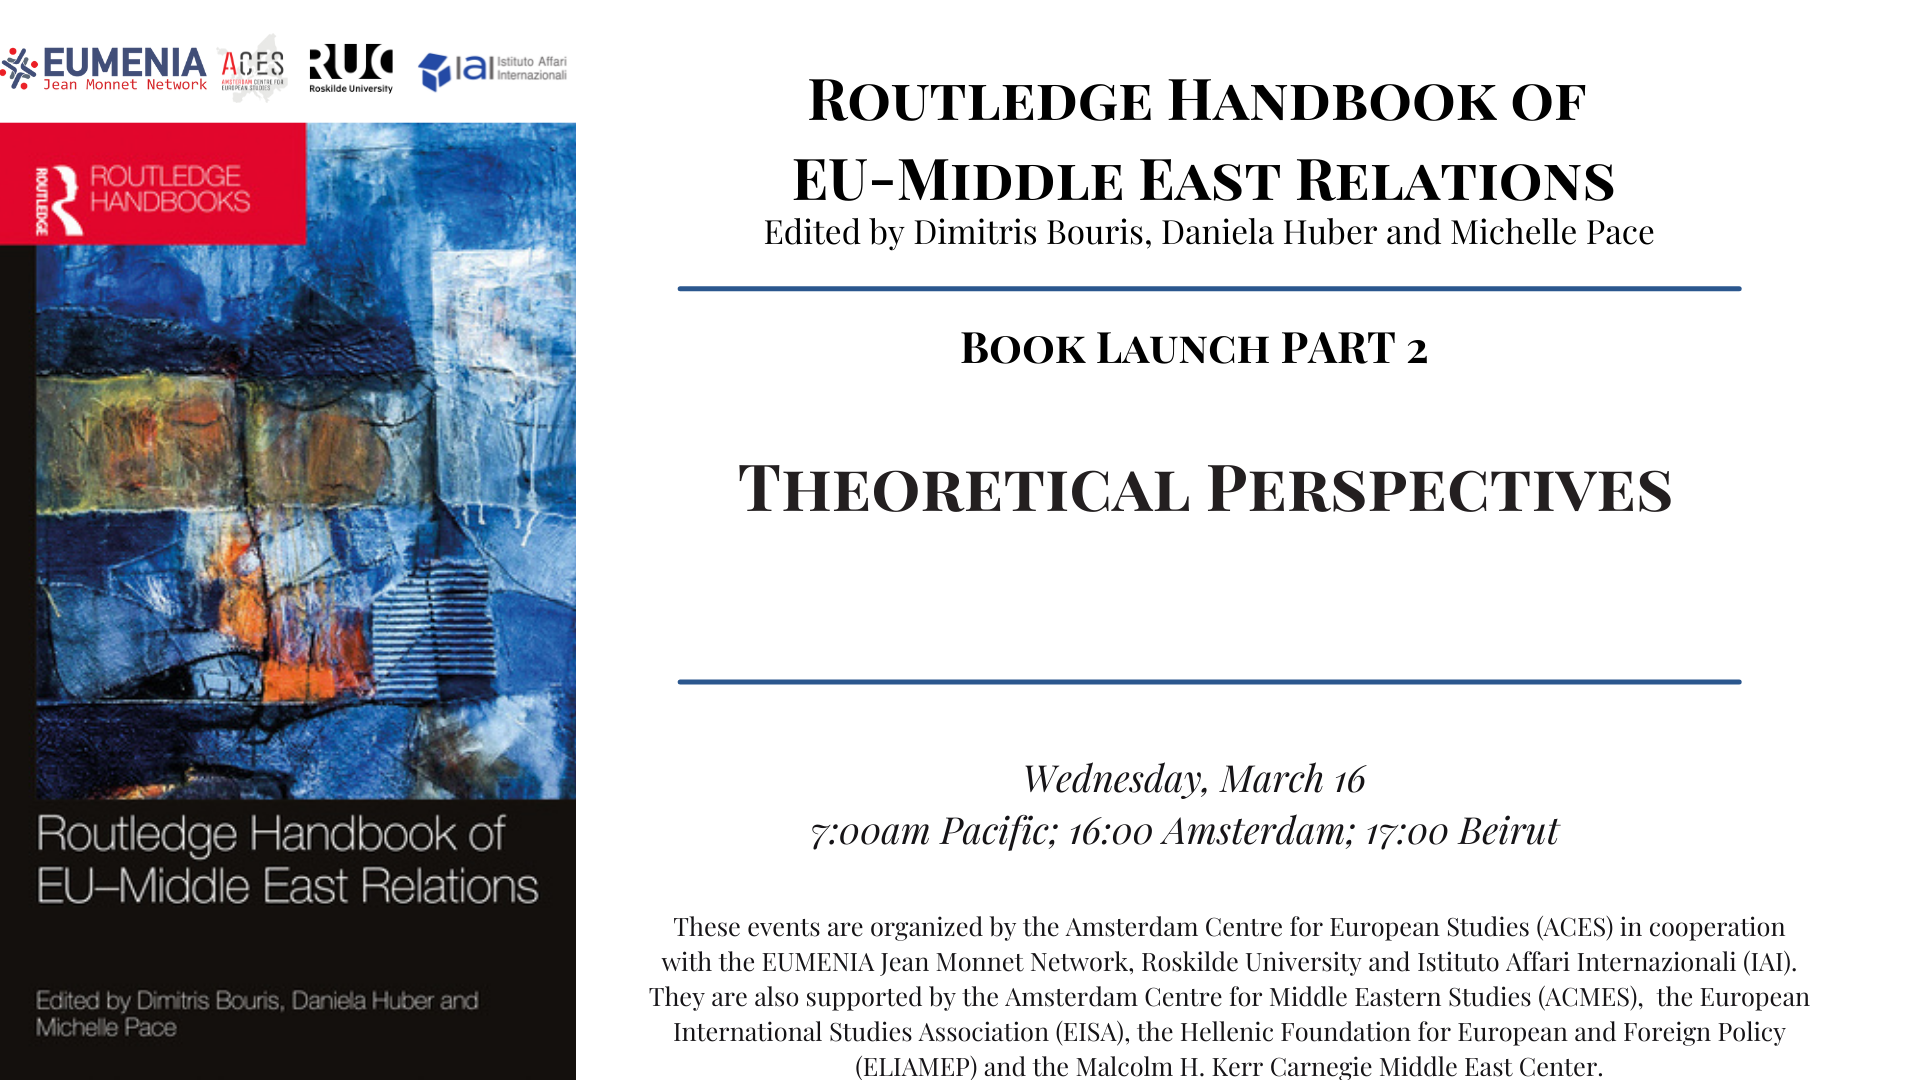 JOIN US FOR THE SECOND EVENT OF THE LAUNCH SERIES OF THE ROUTLEDGE HANDBOOK OF EU-MIDDLE EAST RELATIONS ON WEDNESDAY, MARCH 16